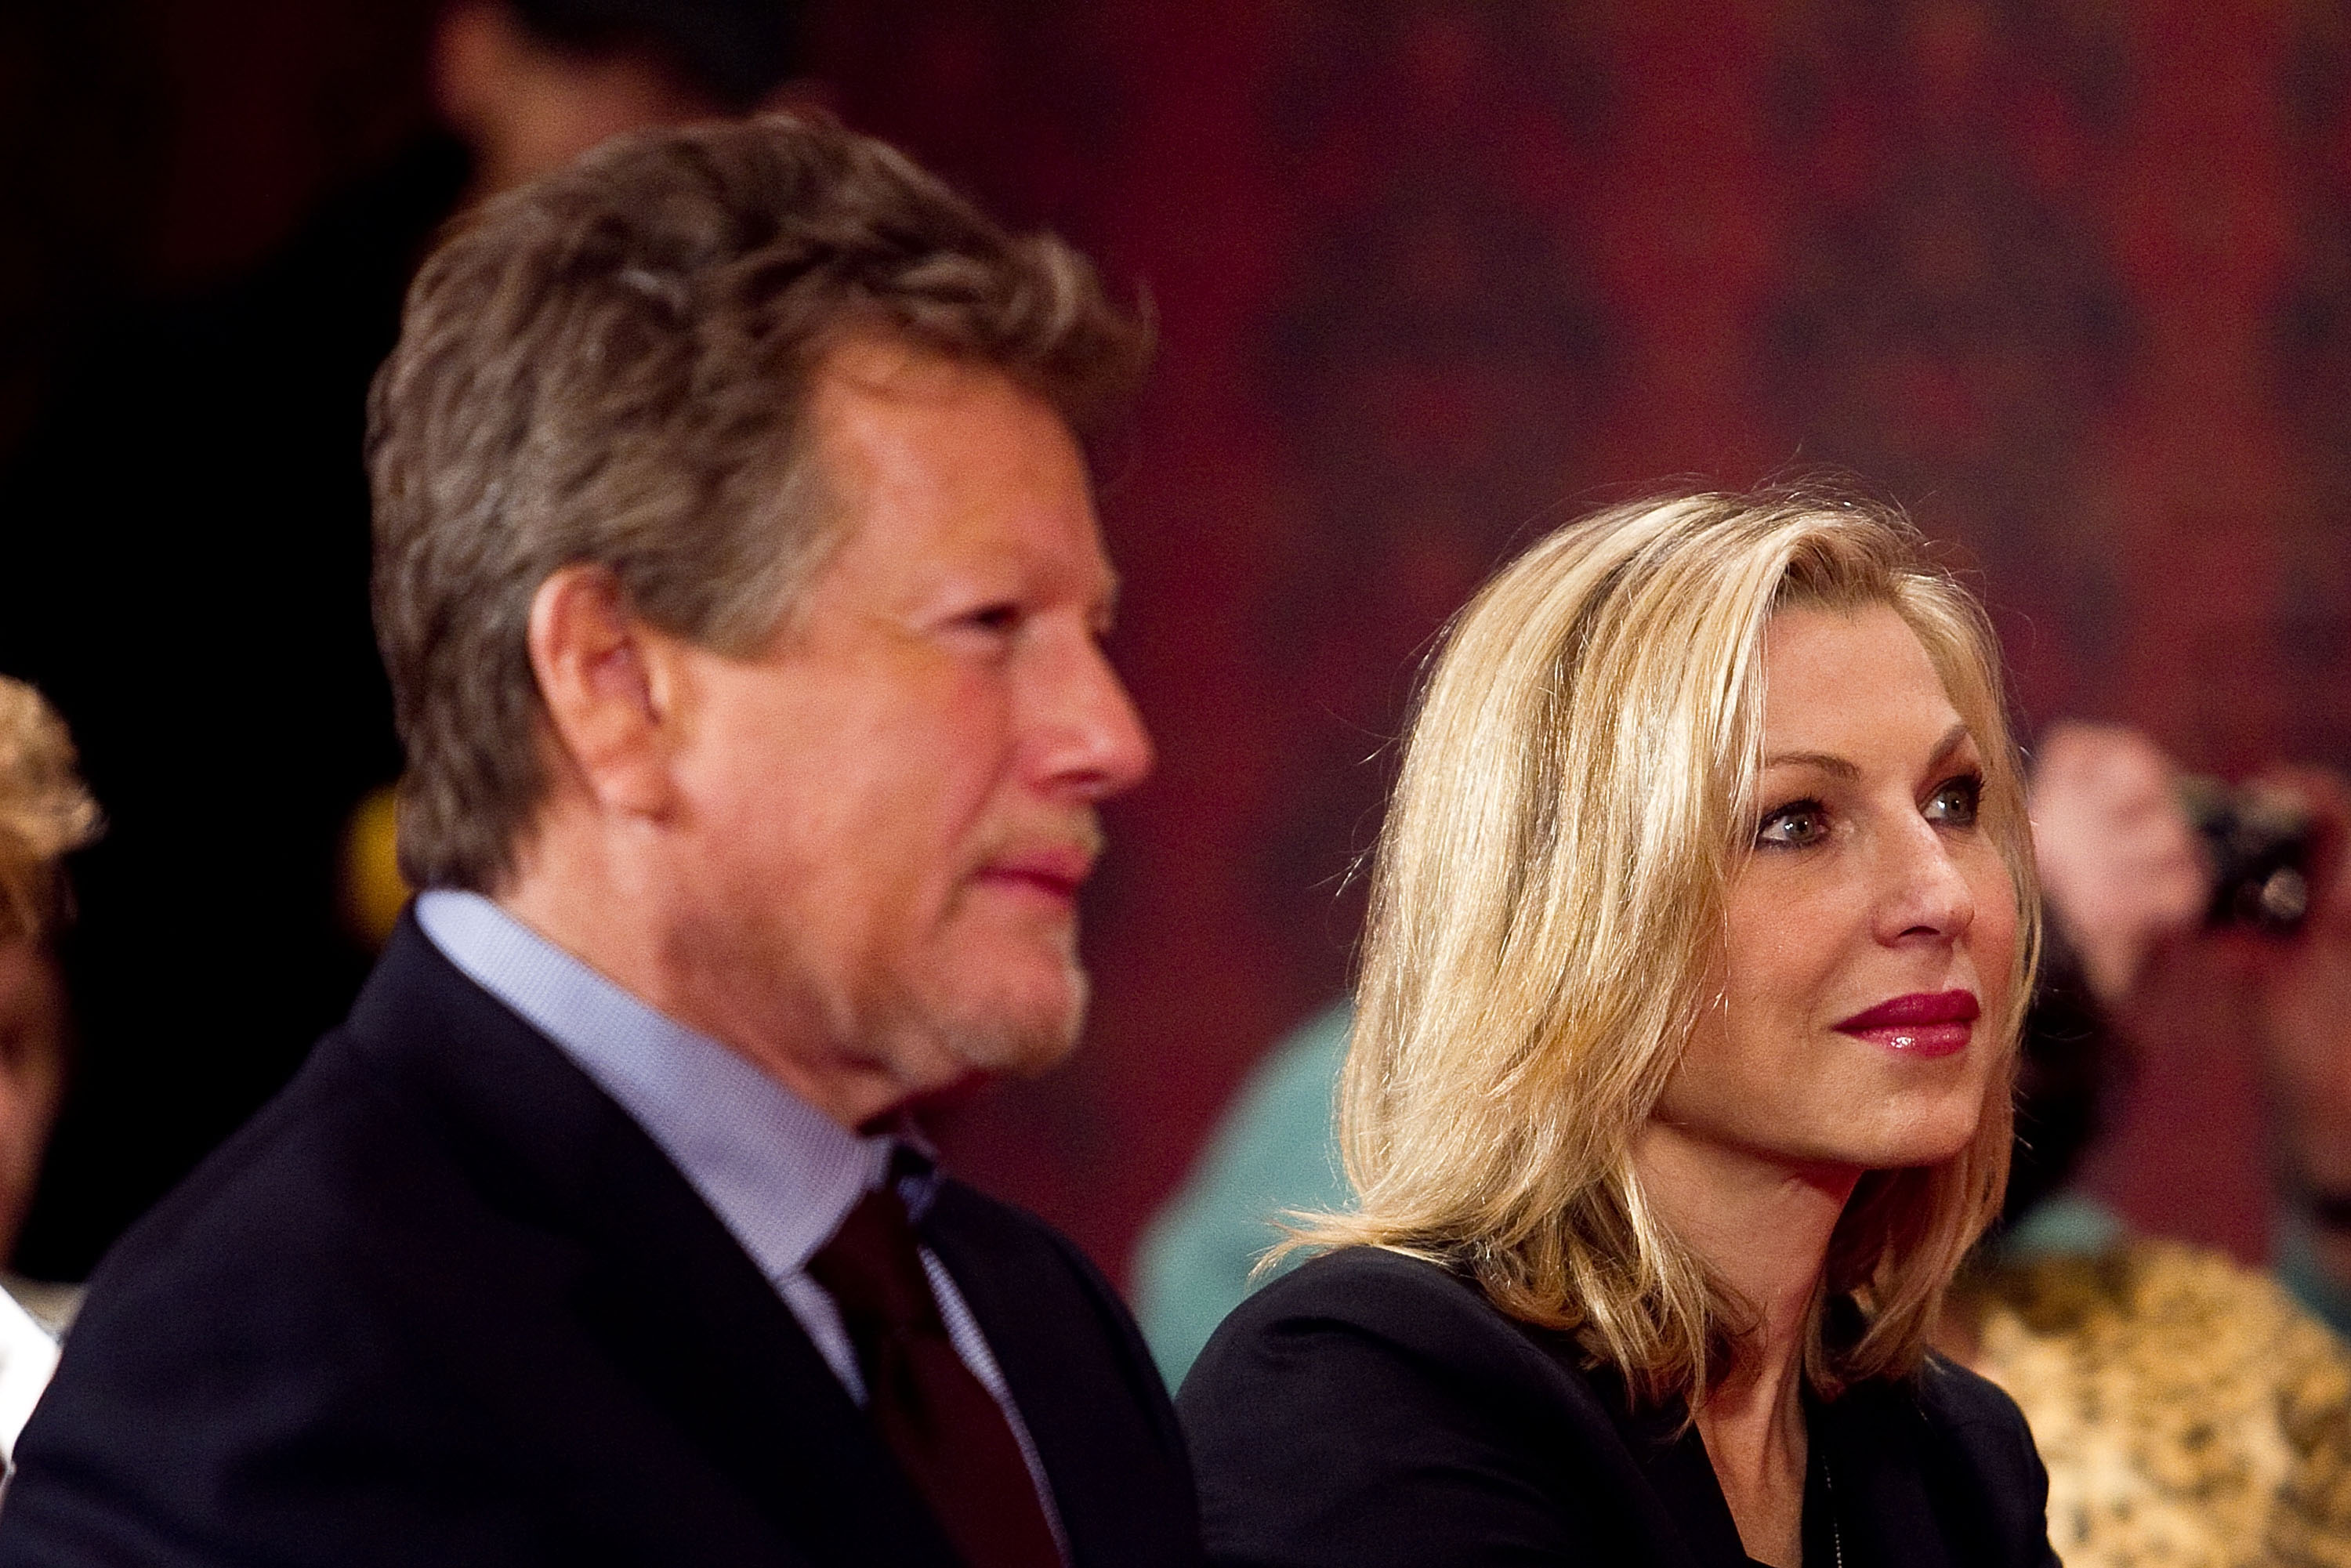 Ryan O'Neal and his daughter Tatum O'Neal in Washington D.C in 2009 | Source: Getty Images